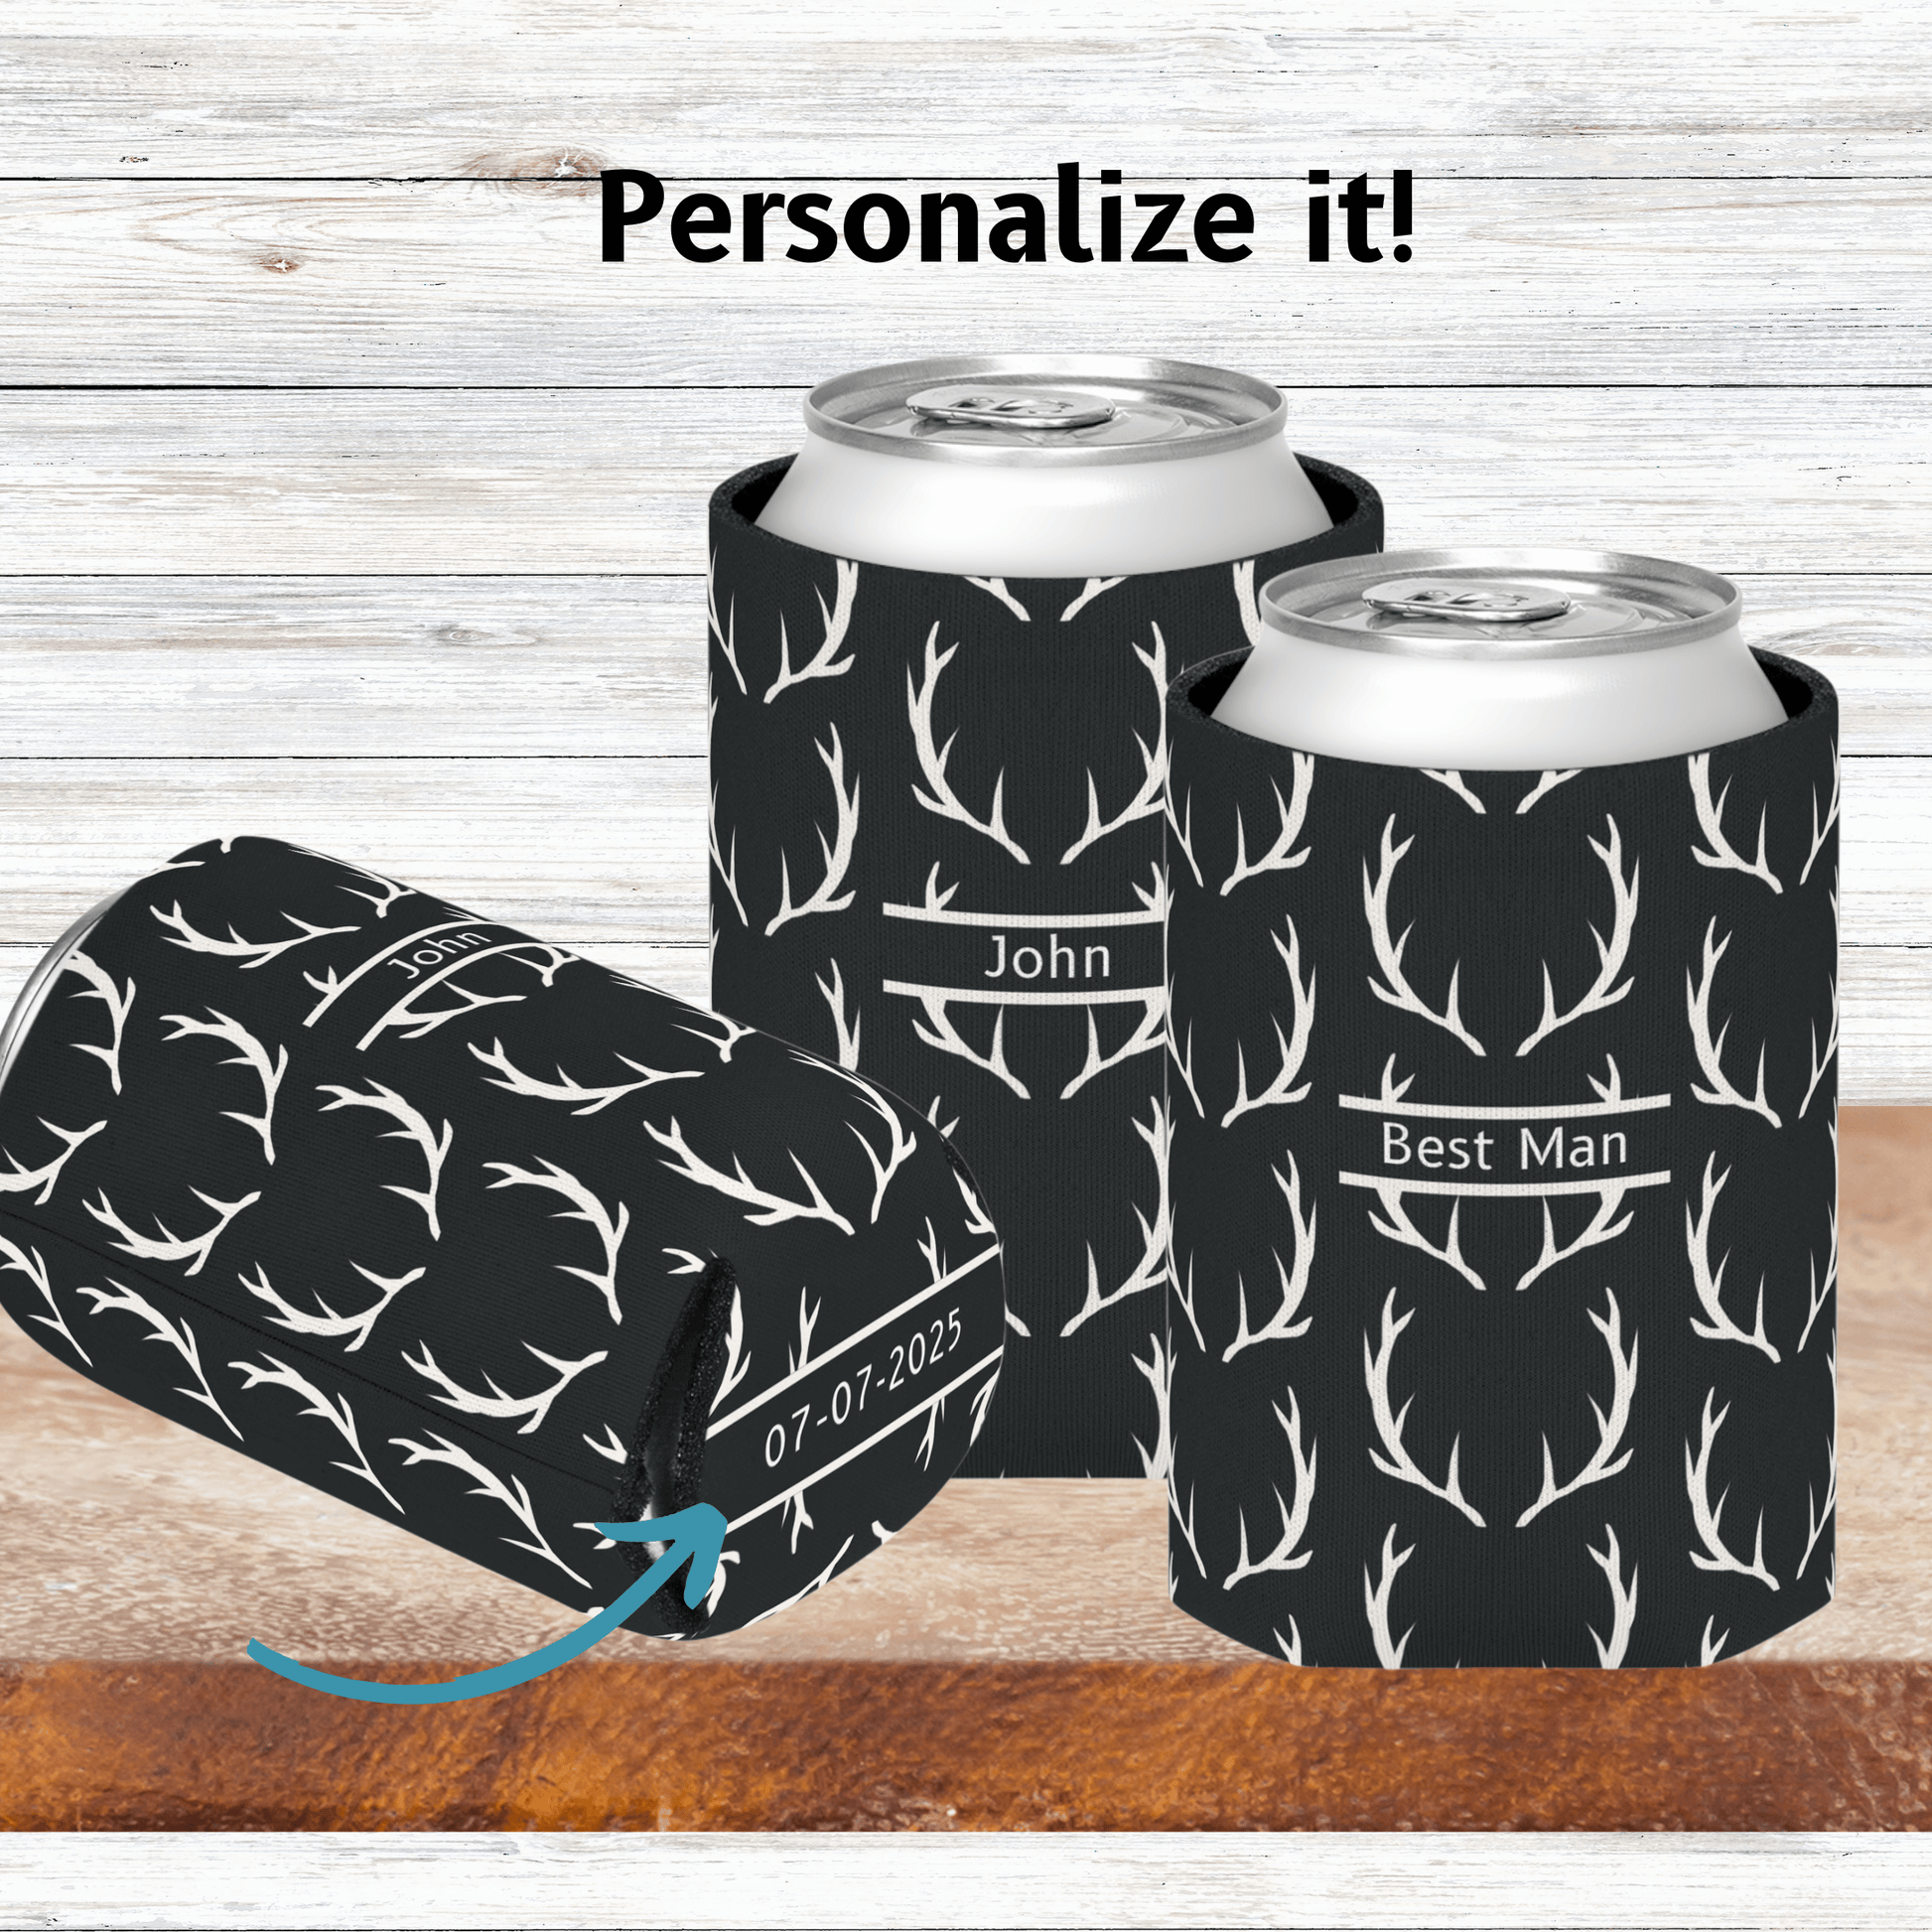 Our personalized koozie drink holder for rustic weddings. This custom koozie makes perfect personalized gifts for groomsmen.